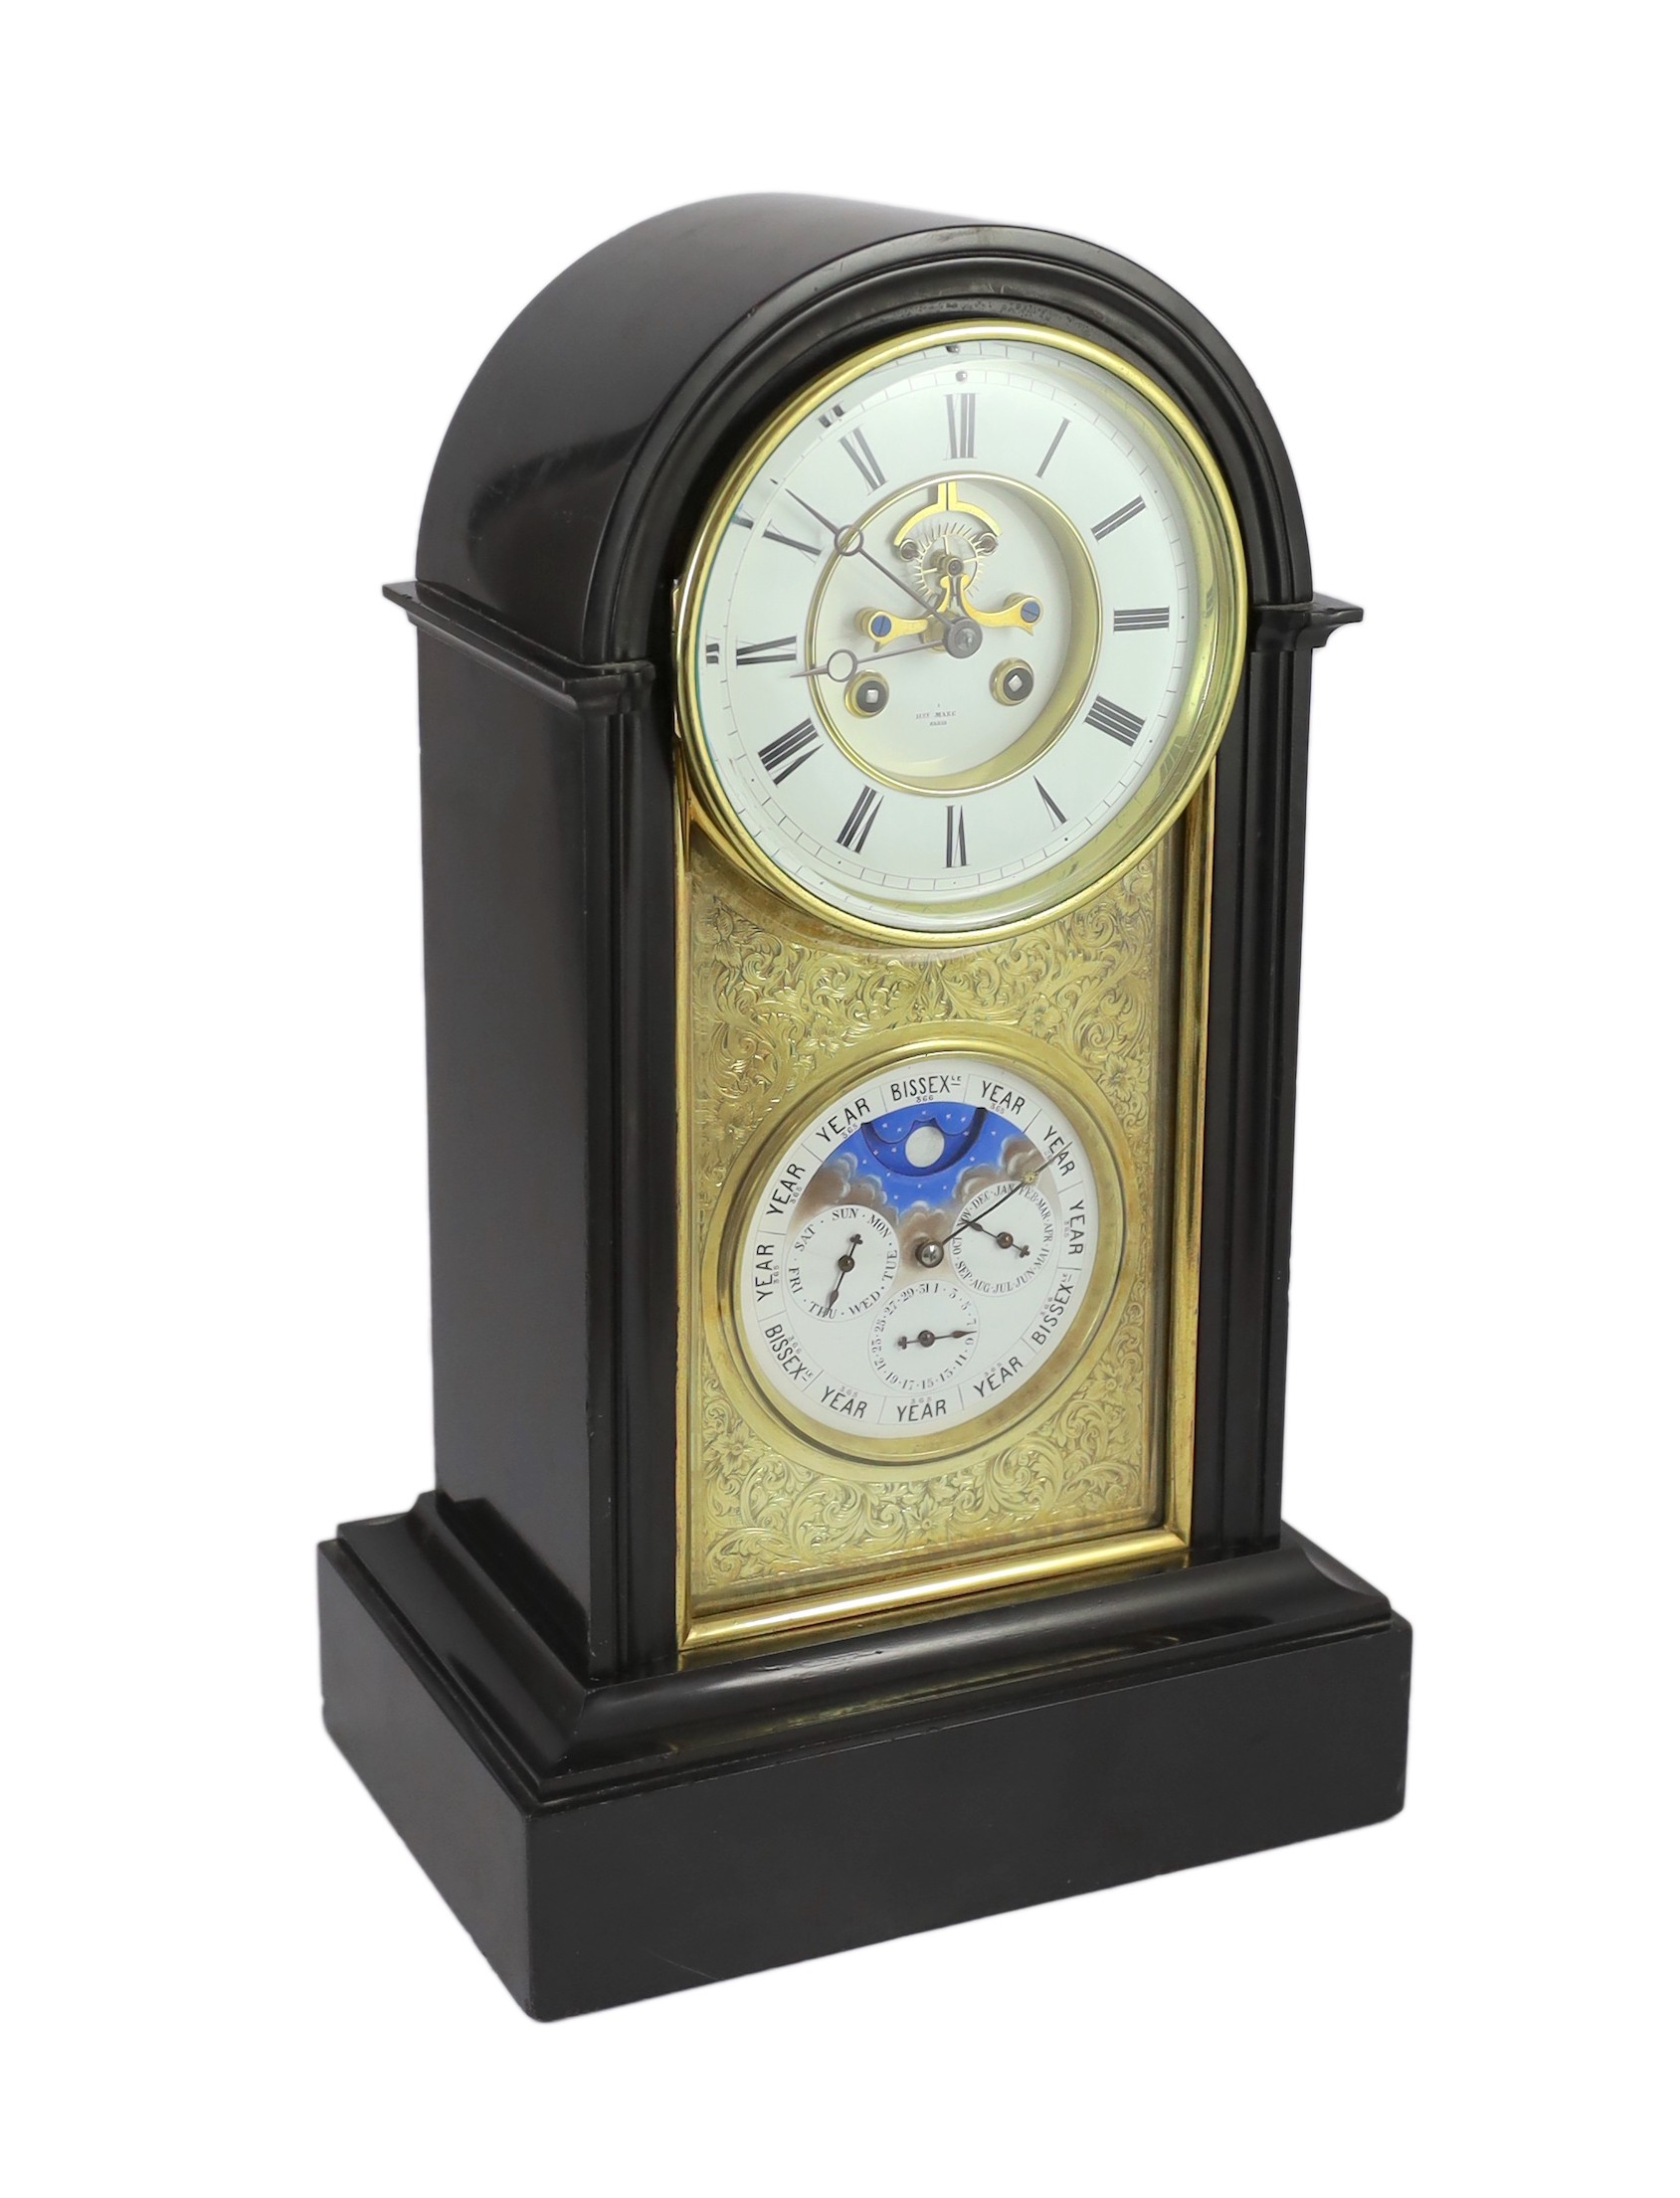 Henri Marc, Paris. A 19th century French arched top black marble mantel clock with perpetual